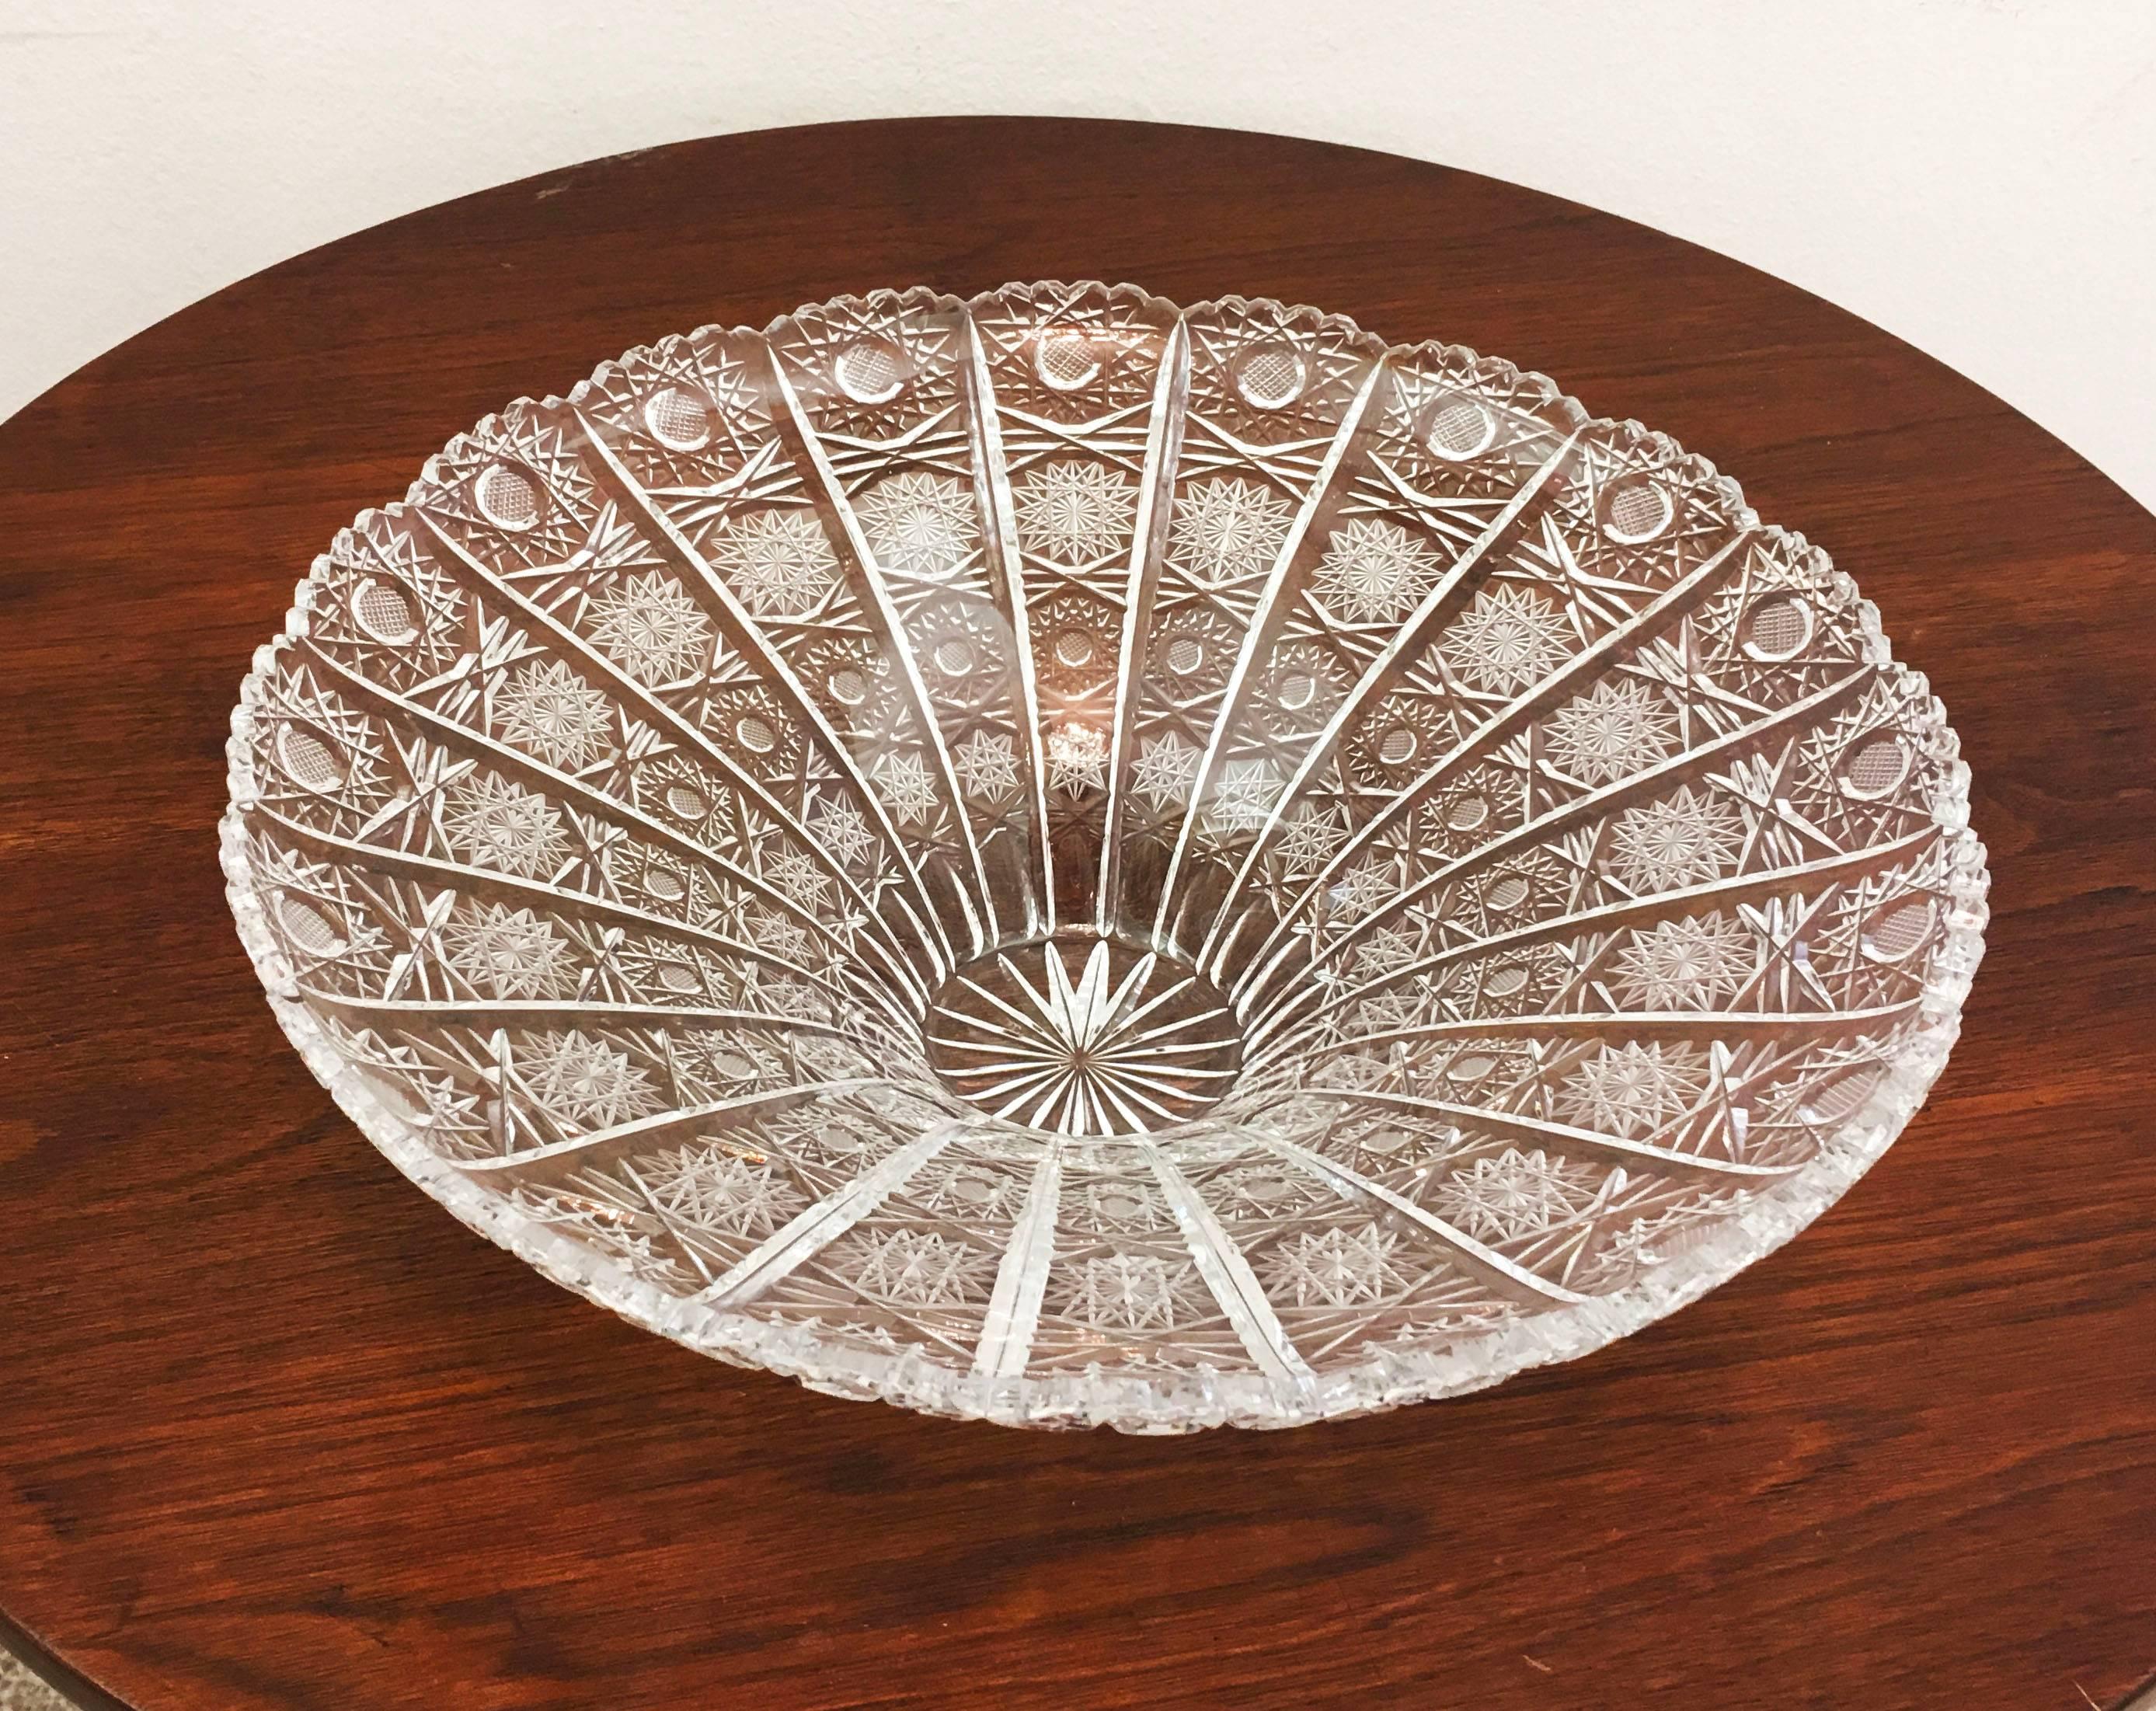 Extravagant cut and polished crystal bowl made circa the 1970s in one of the Bohemian glass works. The cutting is especially Fine and deep with the very intricate patterns. Designed to be used for the centre table.